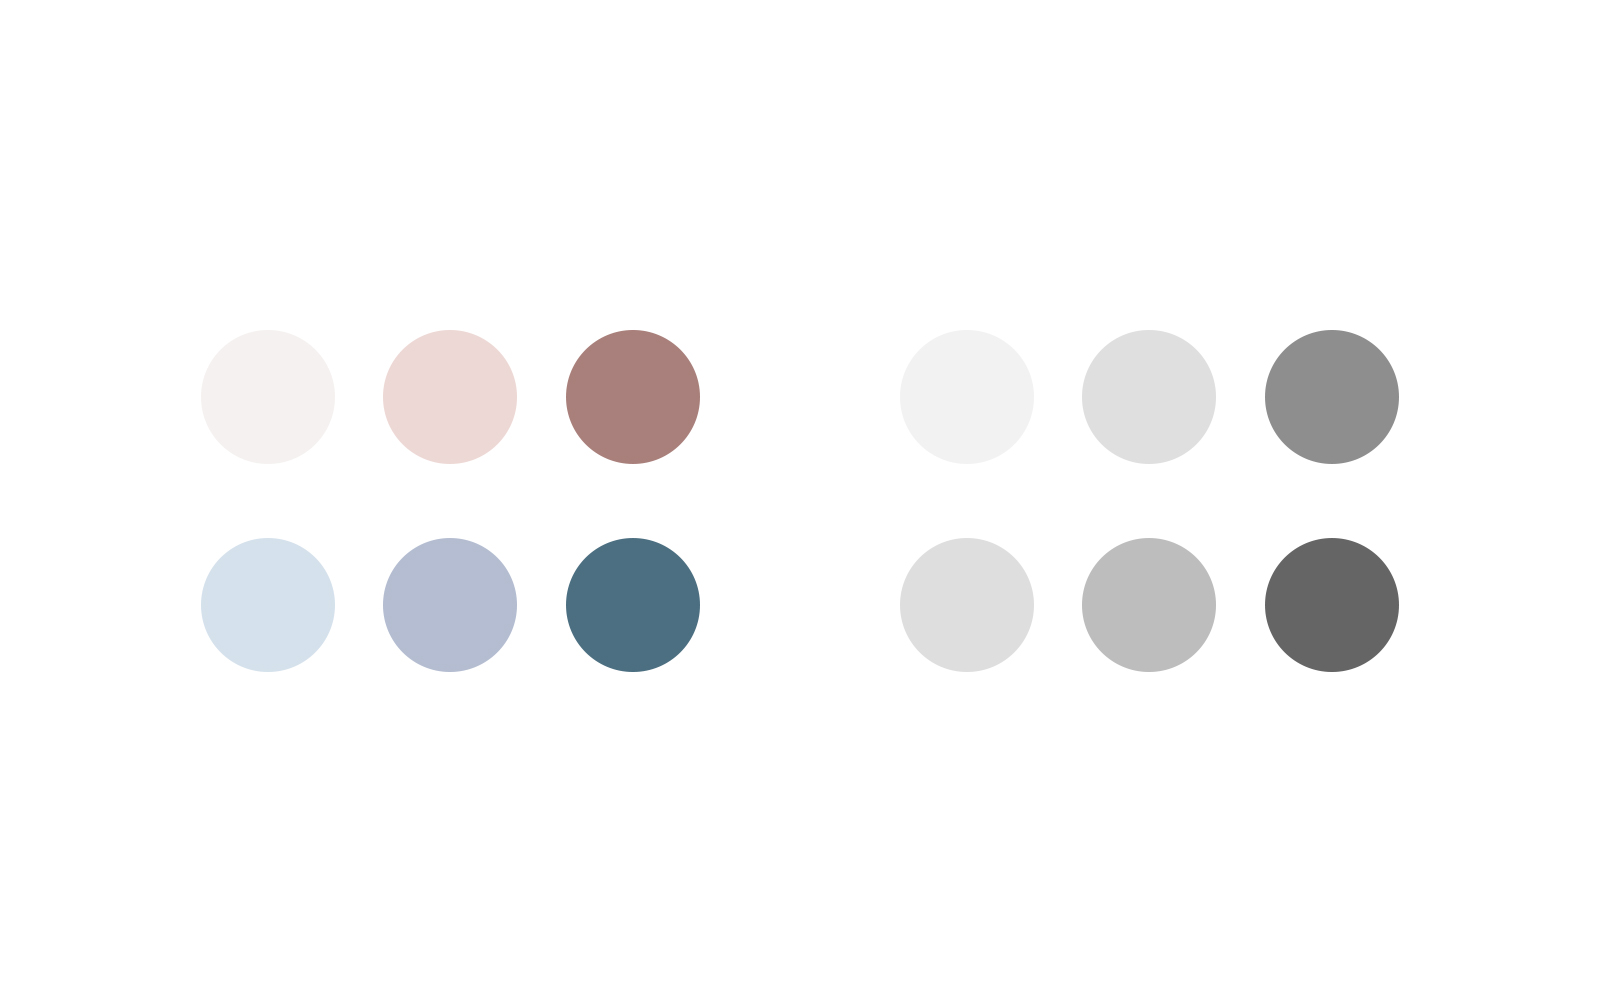 Full color of color palette beside the same color palette in greyscale.